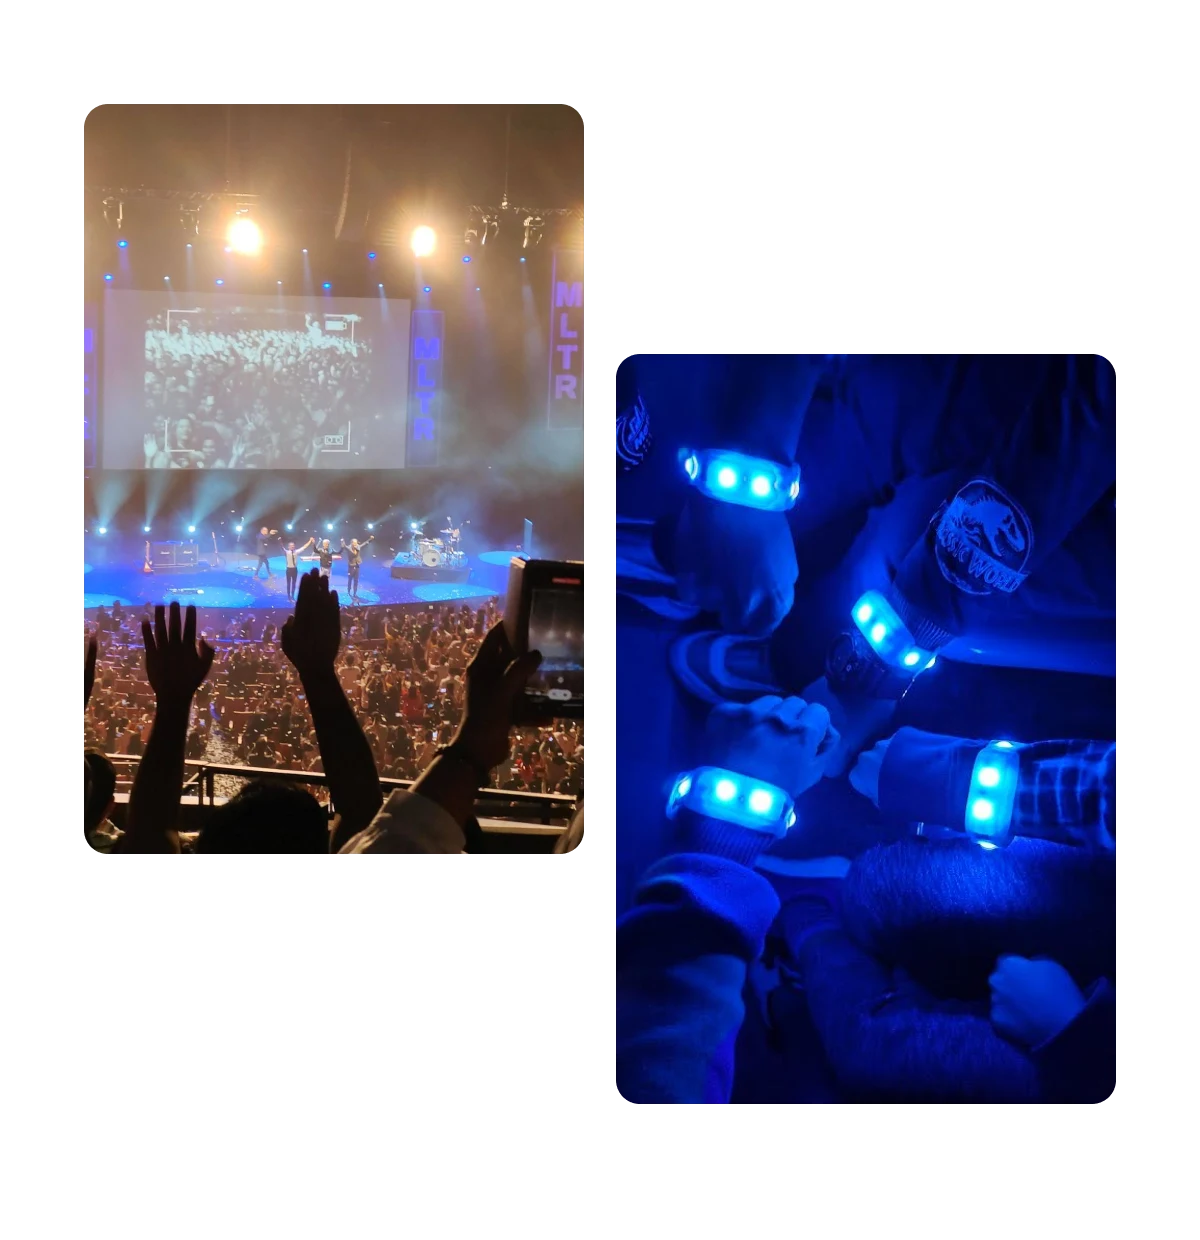 Two pins, people at a music concert, group showing glowing bracelets